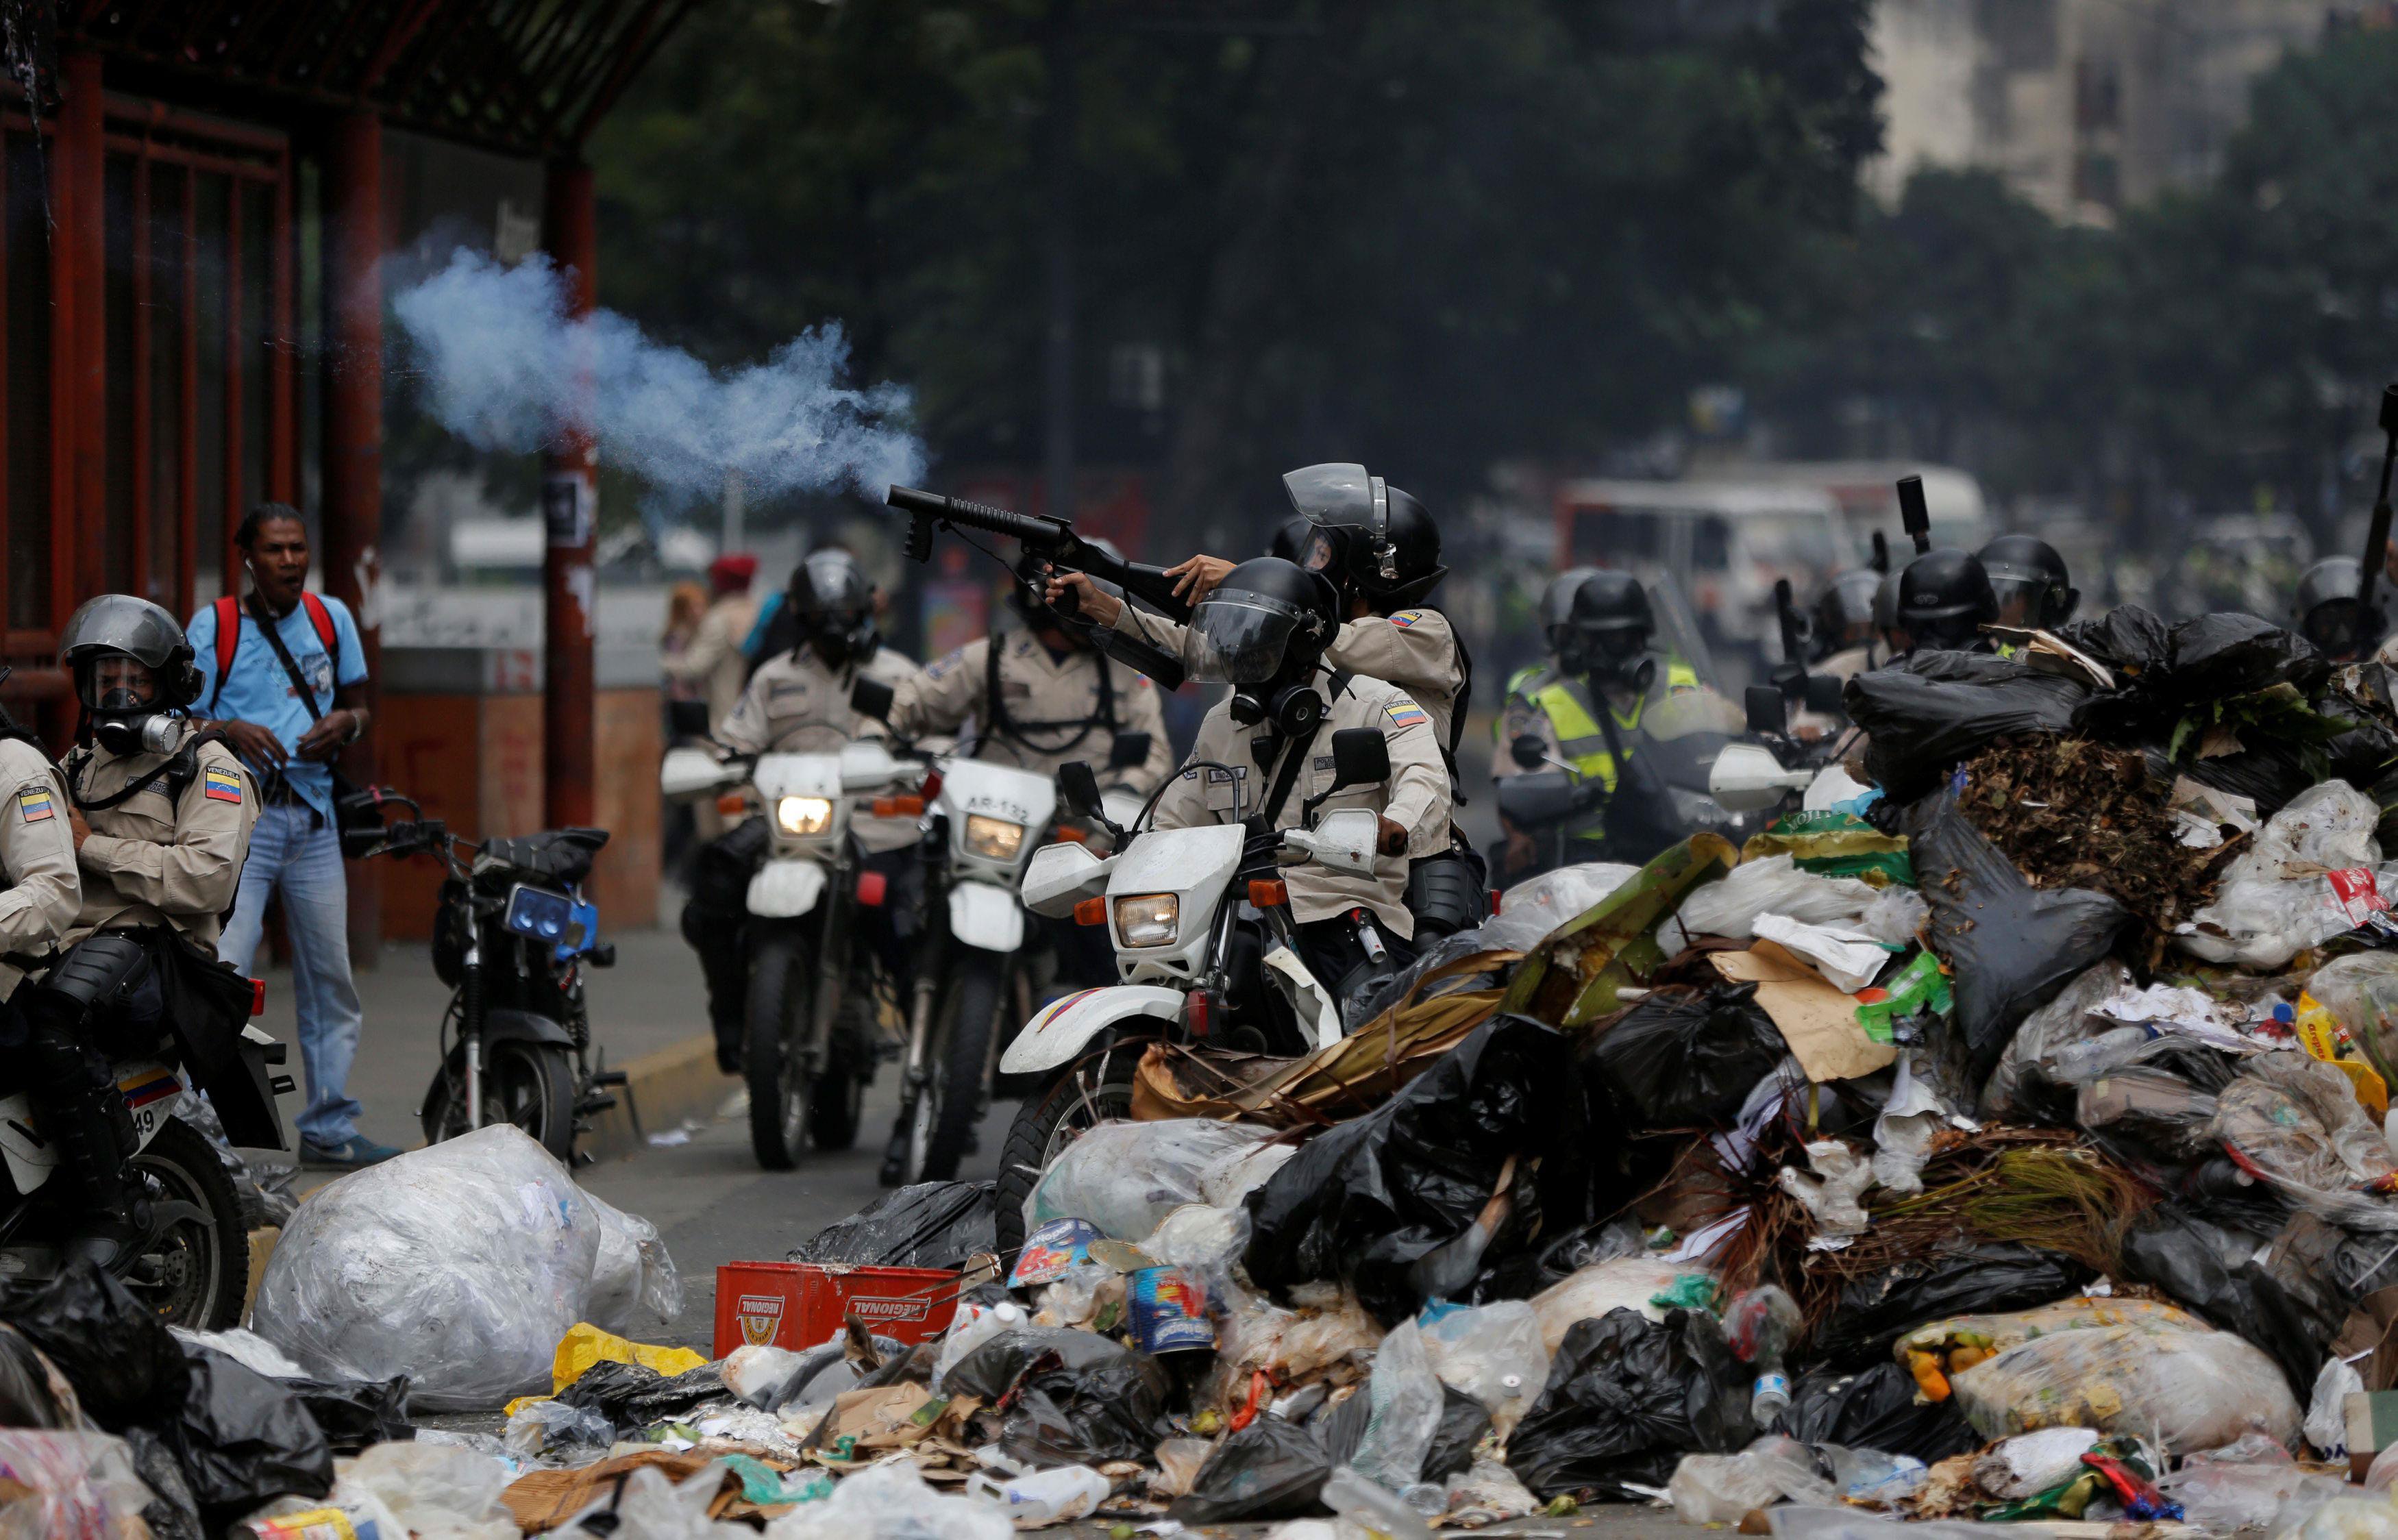 Security forces fire tear gas from behind a pile of garbage during a rally against Venezuelan Presid